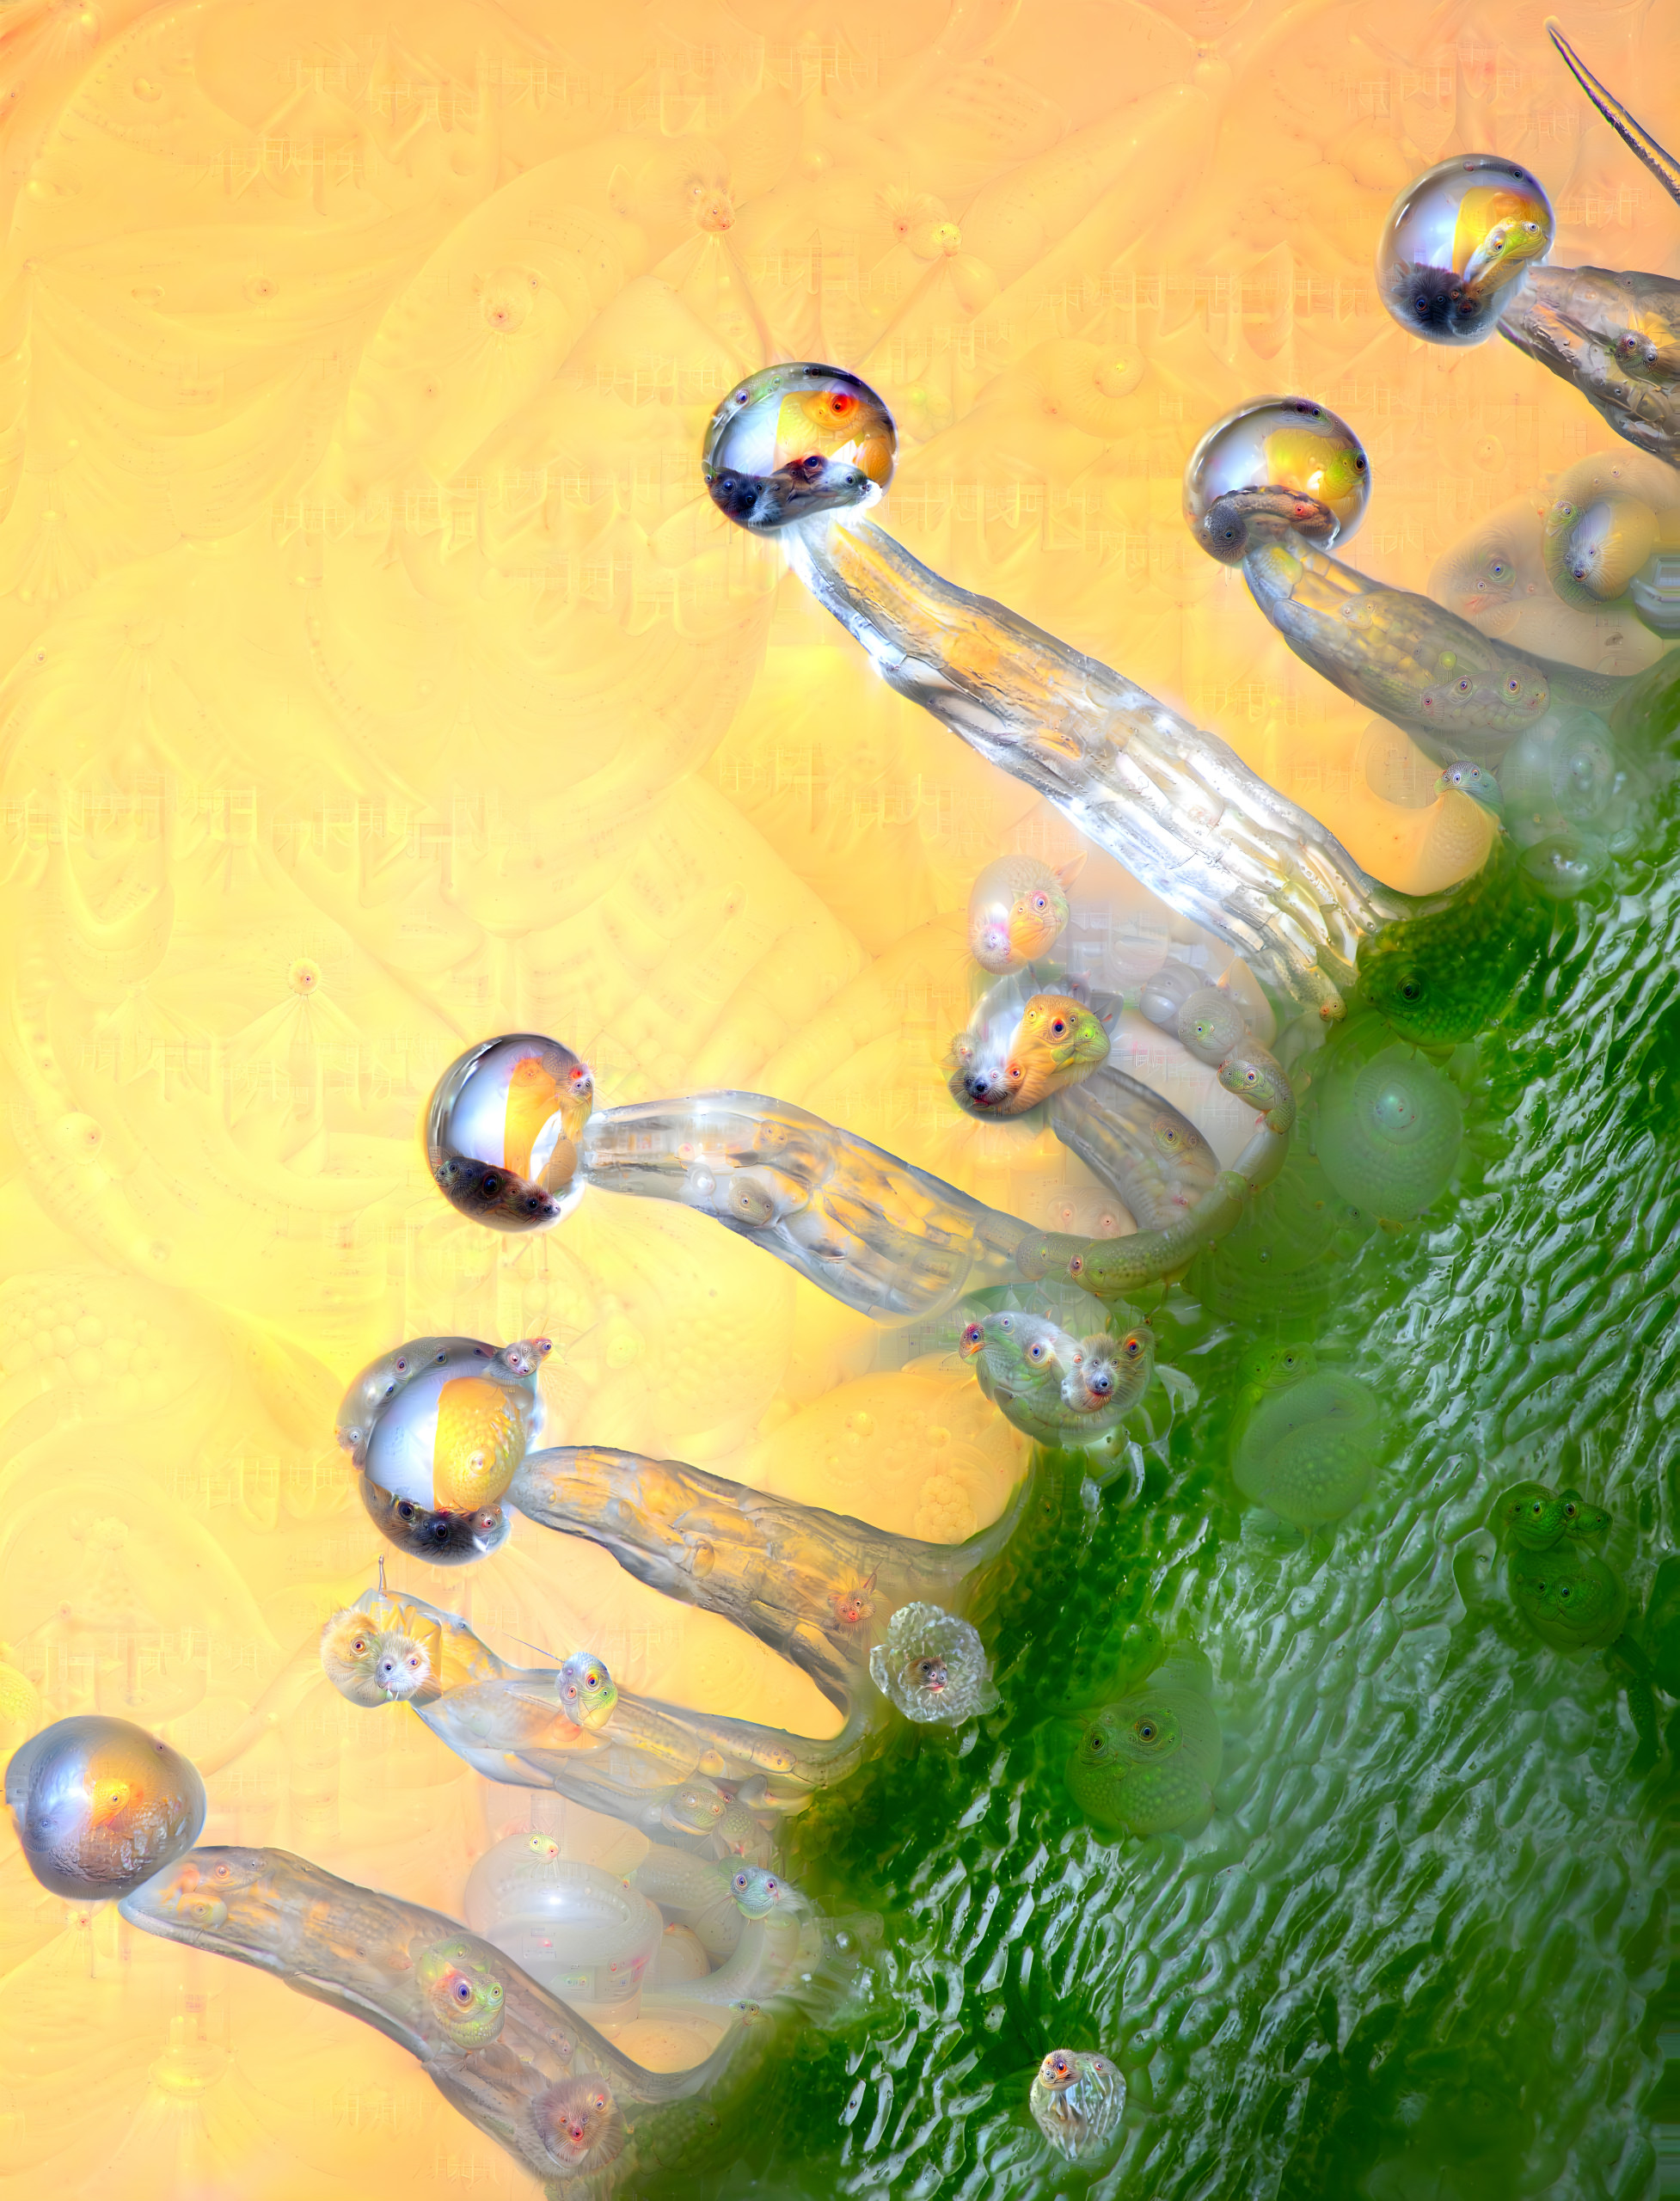 Cannabis Trichomes Photographed at 20x